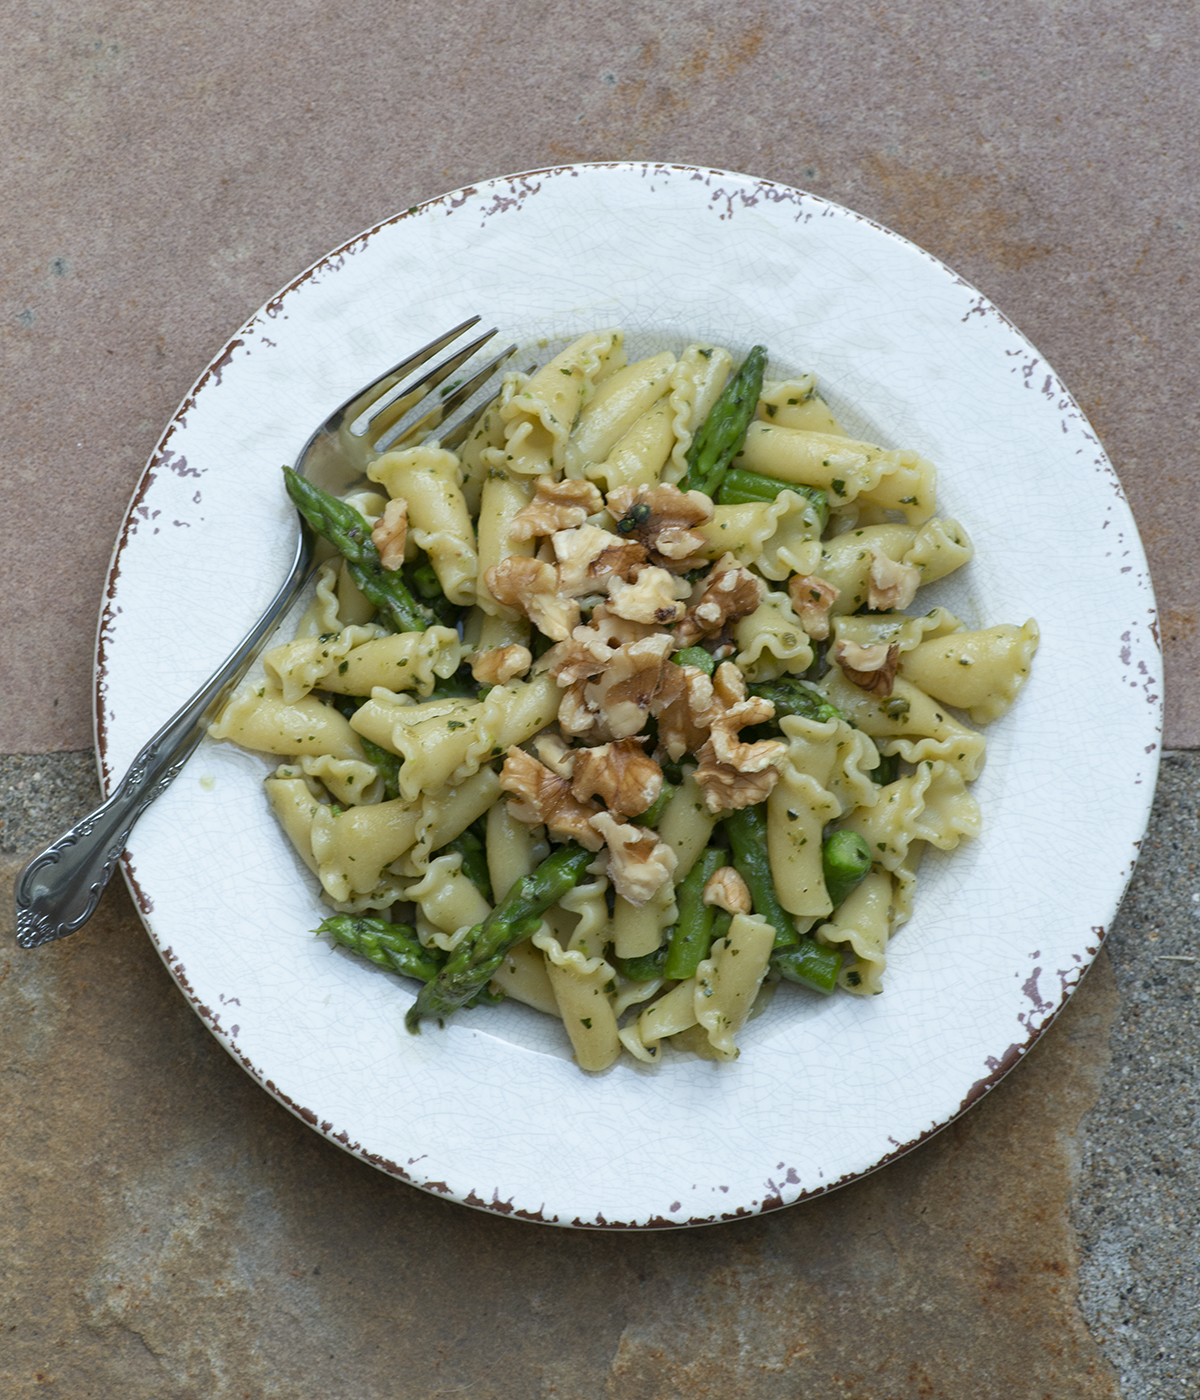 Blue cheese pesto pasta on a plate.